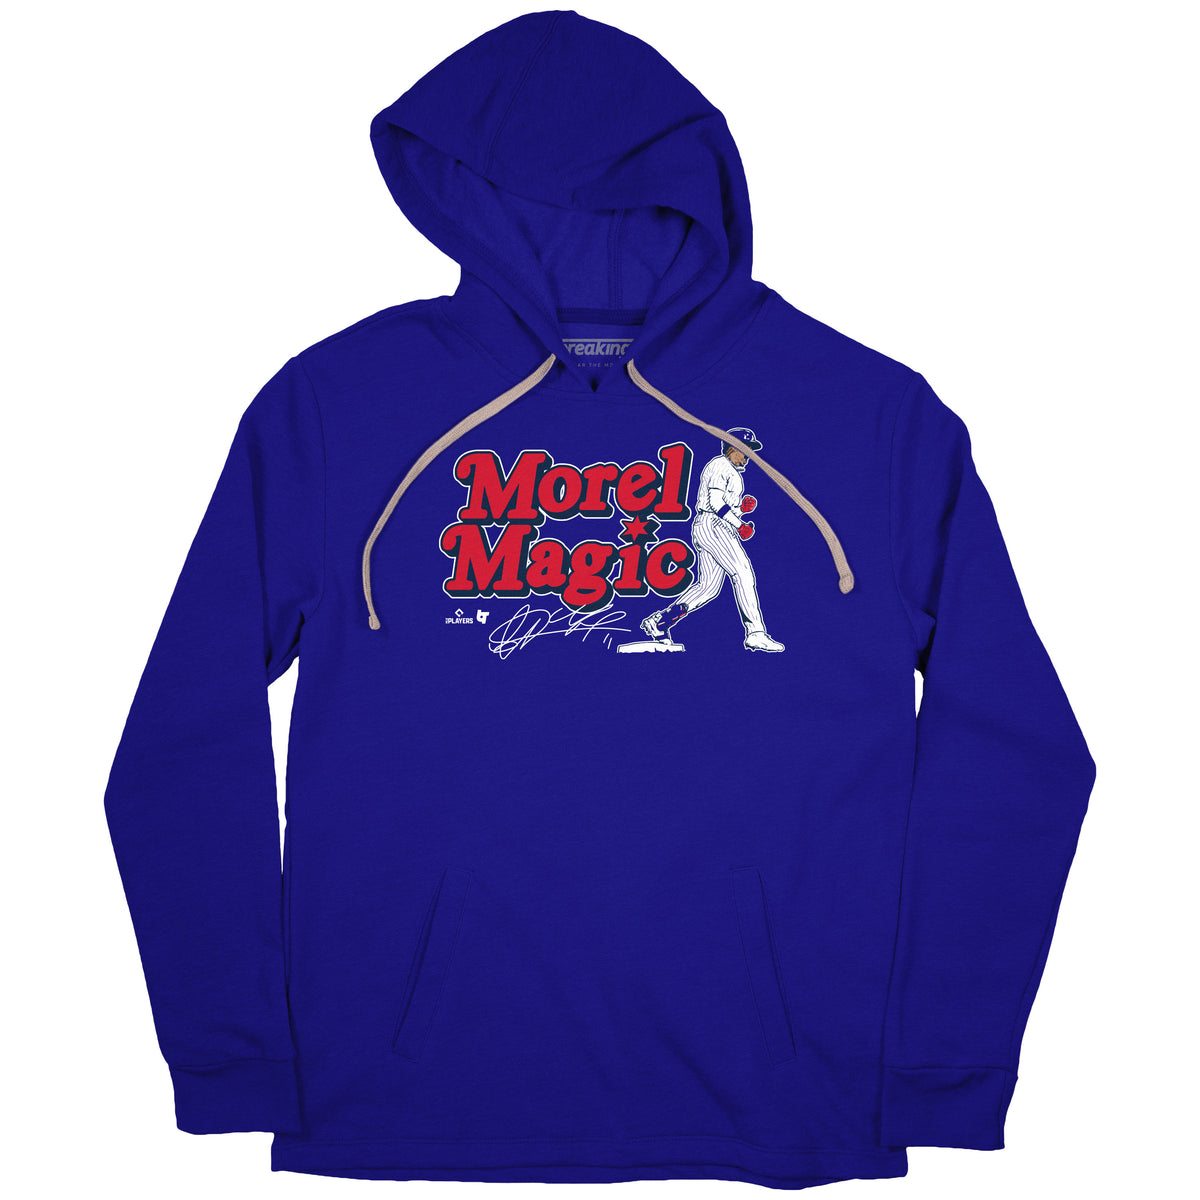 Christopher Morel Believe Chicago Cubs signature shirt, hoodie